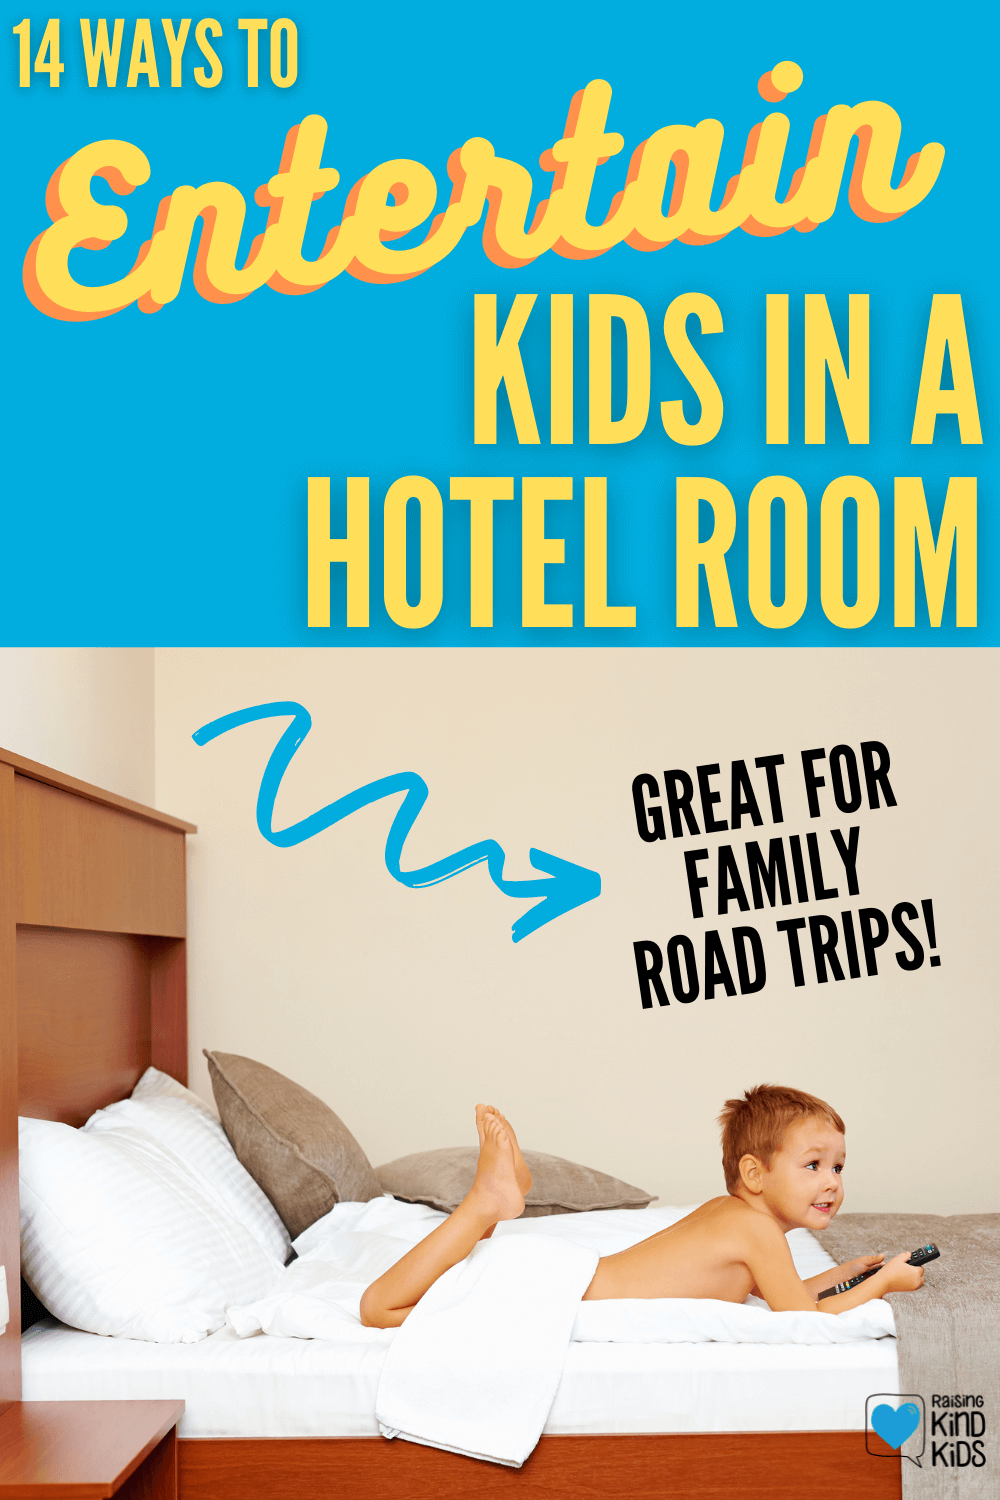 14 ways to entertain kids in a hotel room or motel room on a family vacation or family trip. #familyvacation #familytrip #entertainkids #hotelroom